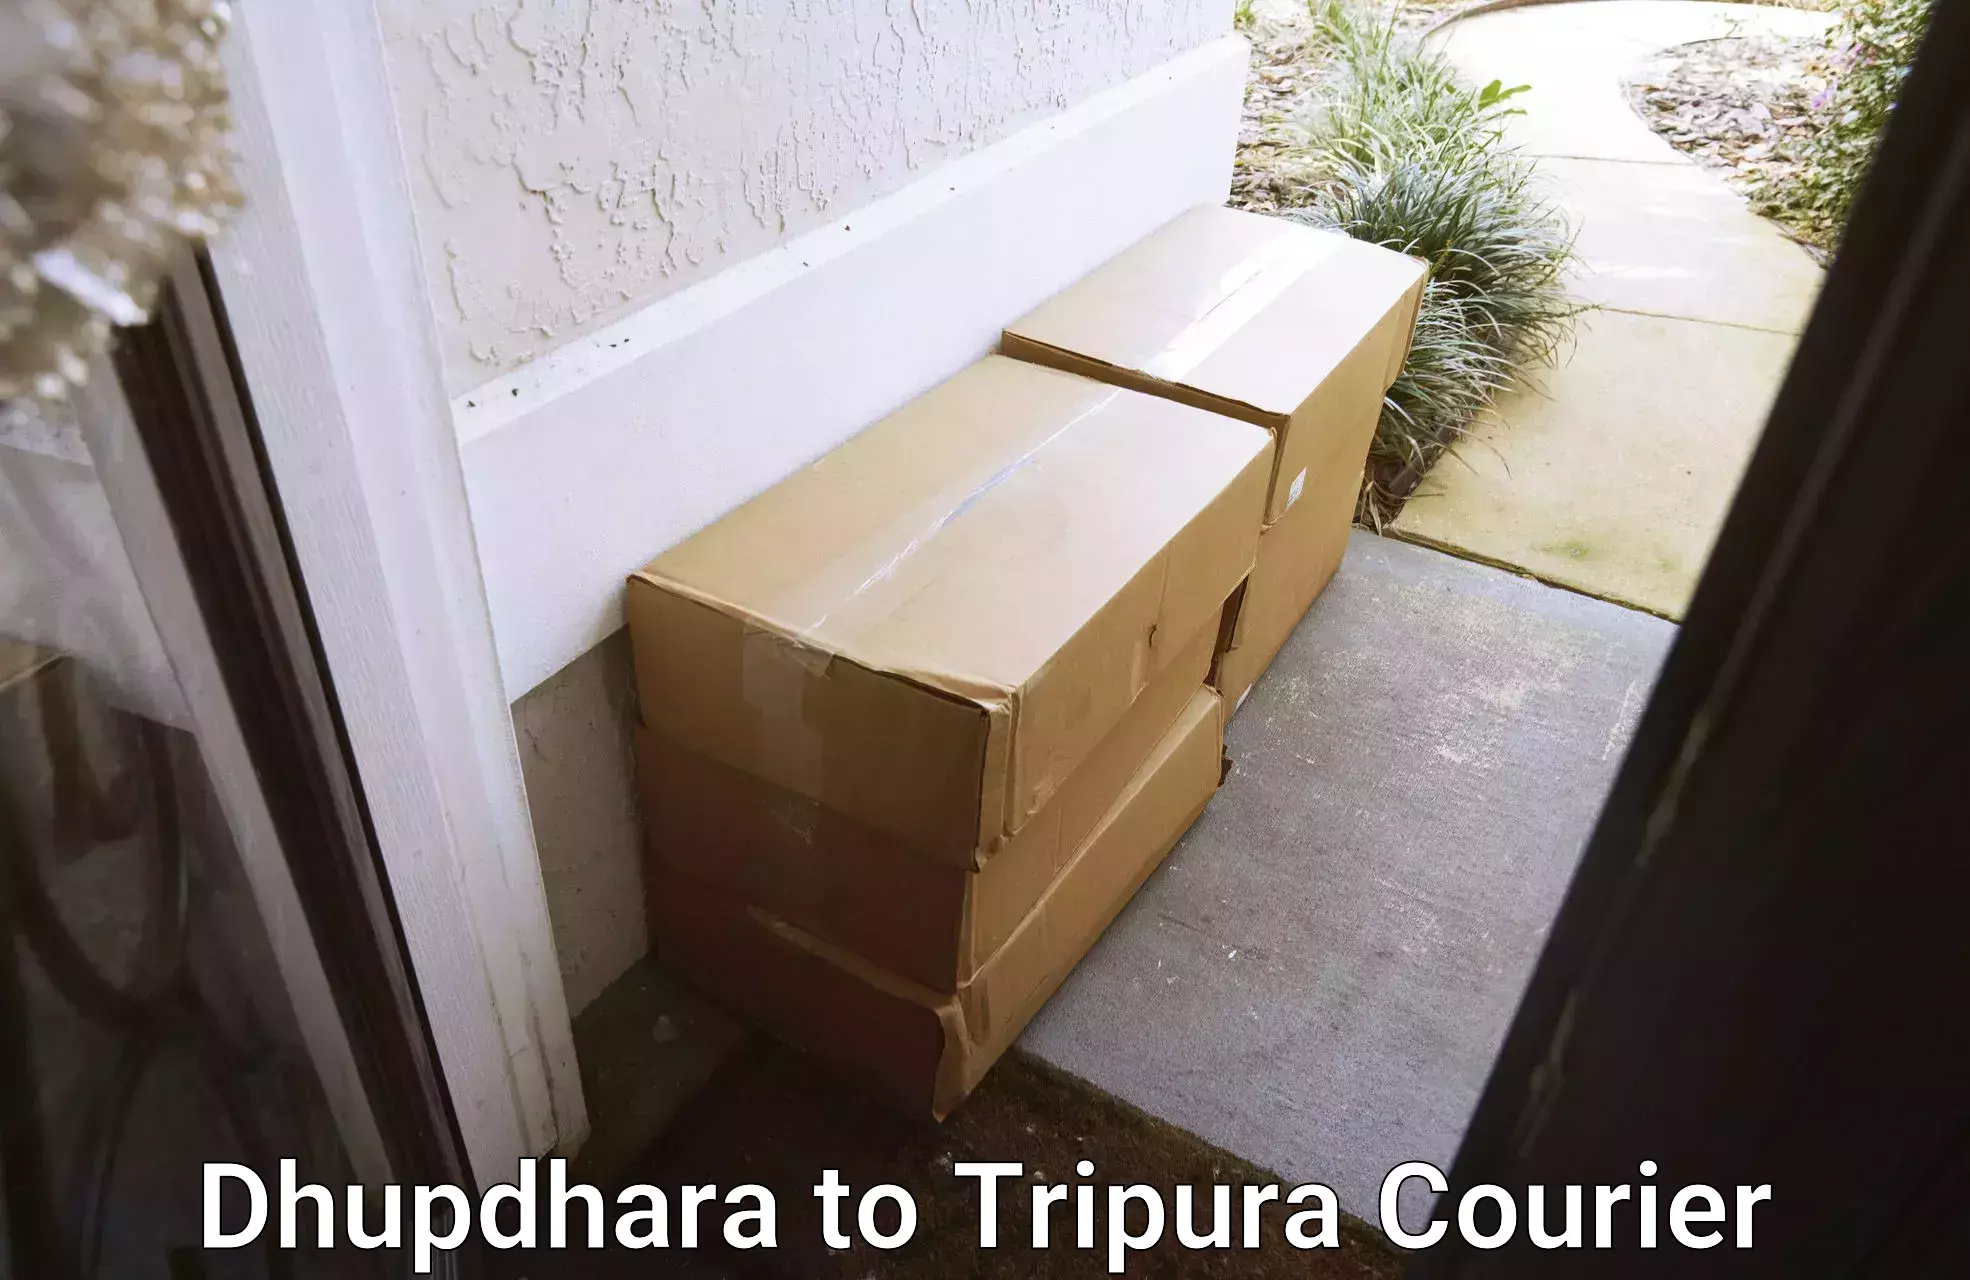 Nationwide delivery network in Dhupdhara to Udaipur Tripura